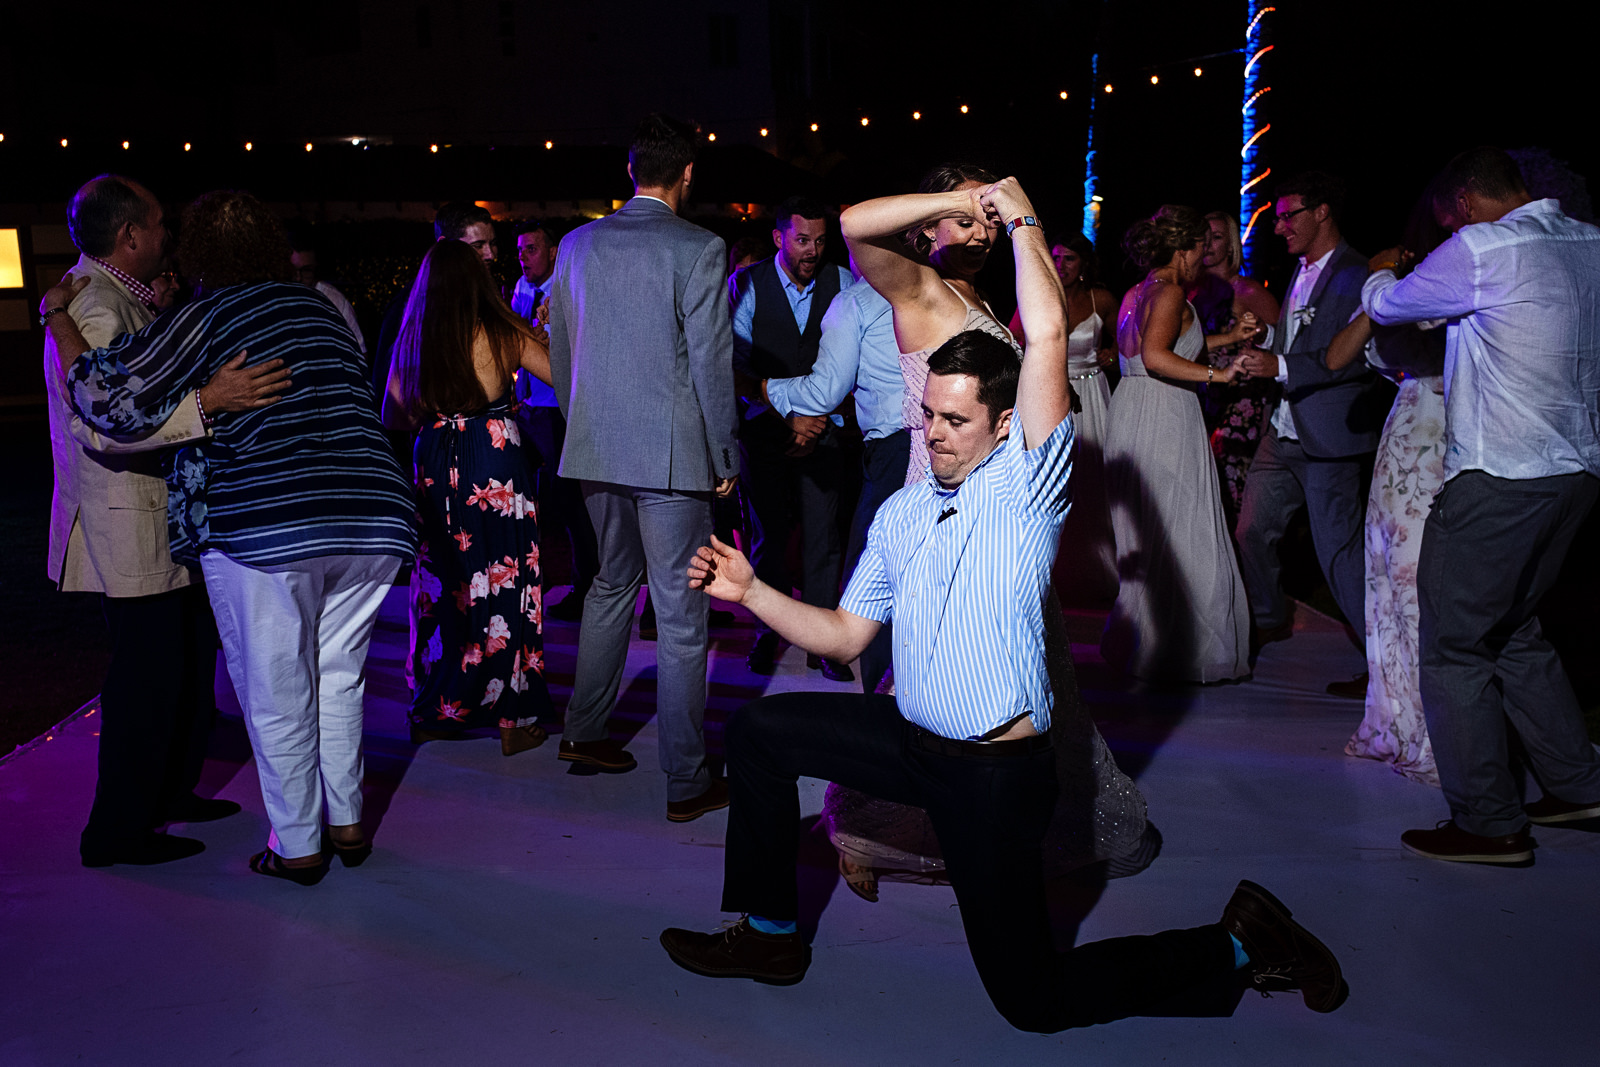 Crazy dance moves from wedding guests